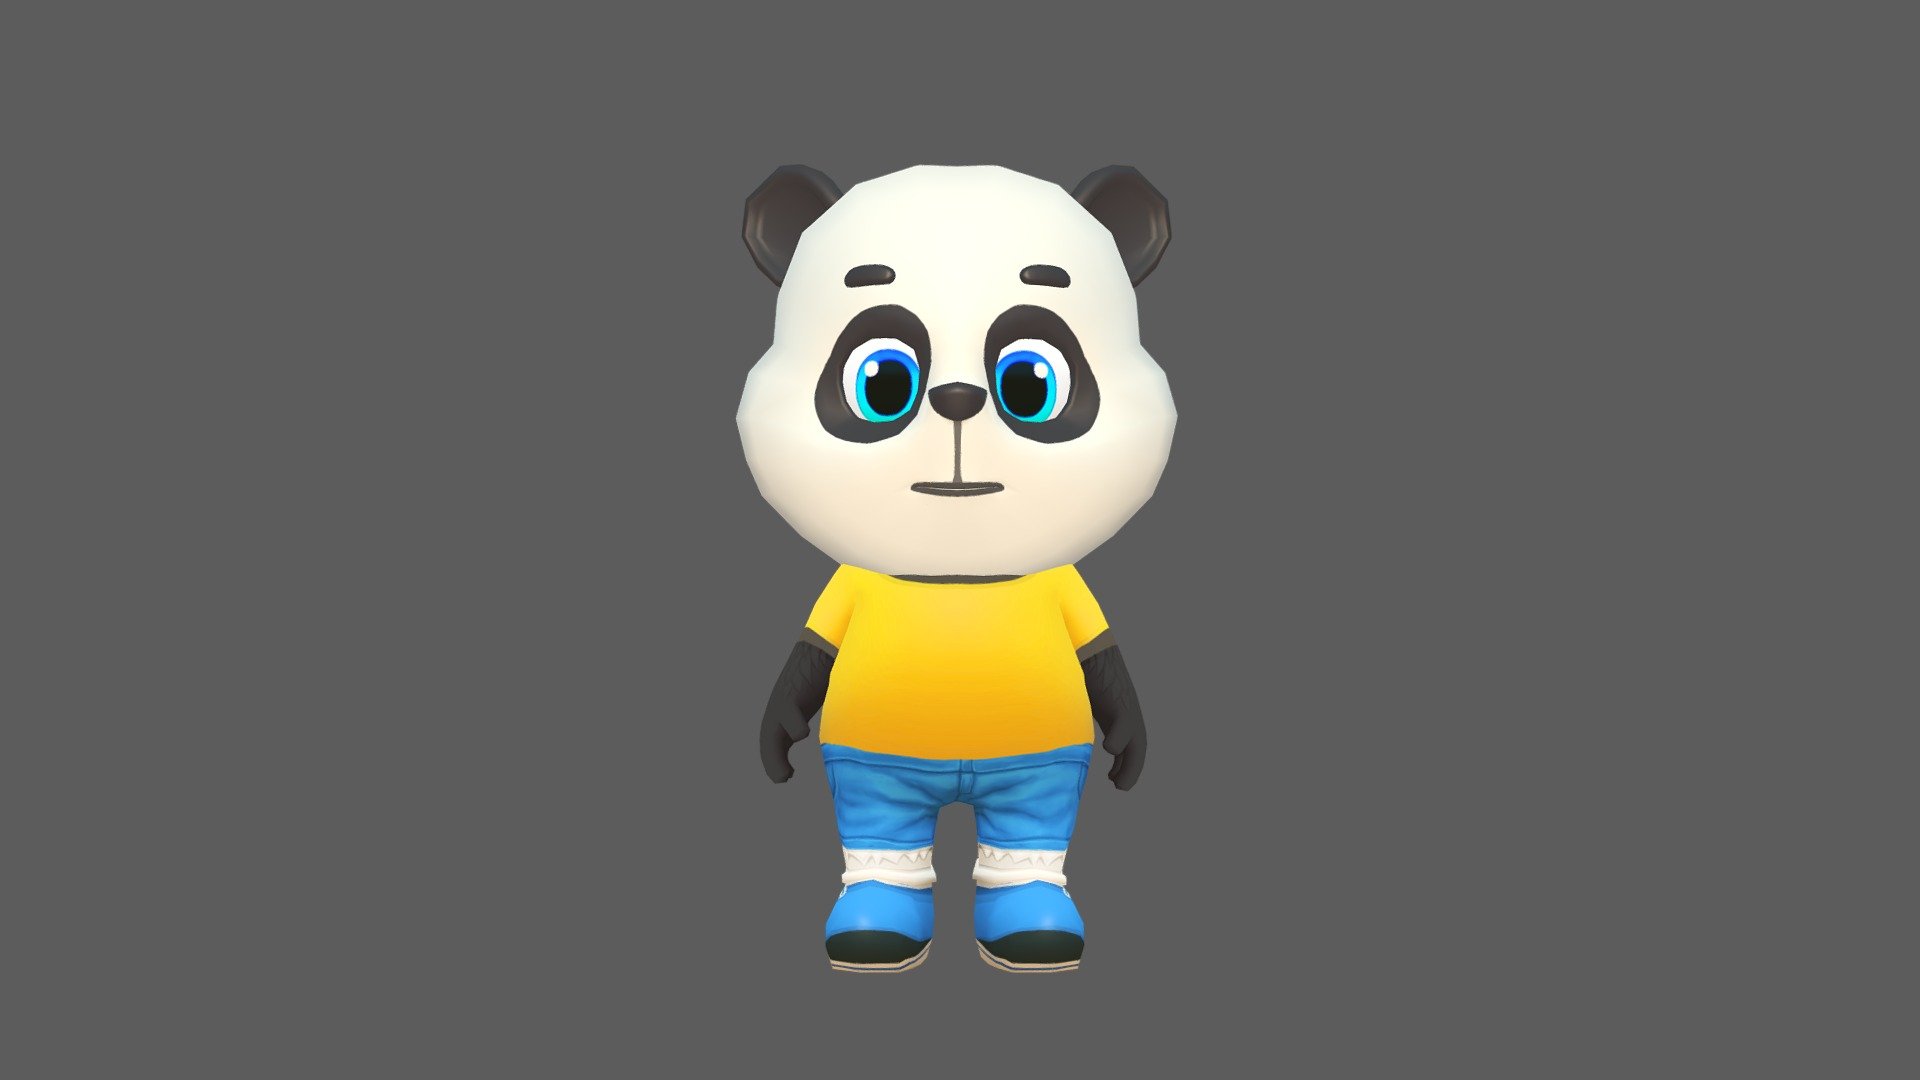 Panda Bear character for games and animations. The model is game ready and compatible with game engines.

Included Files:




Maya (.ma, .mb) - 2015 - 2020

FBX - 2014 - 2020

OBJ

Supports Humanoid Animation:




Unity Humanoid compatible.

Mixamo and other humanoid animation libraries (MoCap).

Removable Tail.

Full Facial and Body Rig for further animation.

The model is lowpoly with four texture resolutions 4096x4096, 2048x2048, 1024x1024 &amp; 512x512.

The package includes 18 Animations:




Run

Idle

Jump

Leap left

Leap right

Skidding

Roll

Crash &amp; Death

Power up

Whirl

Whirl jump

Waving in air

Backwards run

Dizzy

Gum Bubble

Gliding

Waving

Looking behind

The model is fully rigged and can be easily animated in case further animating or modification is required.

The model is game ready at:




3492 Polygons

3481 Vertices

The model is UV mapped with non-overlapping UV's. The shadows and lights are baked in the texture 3d model